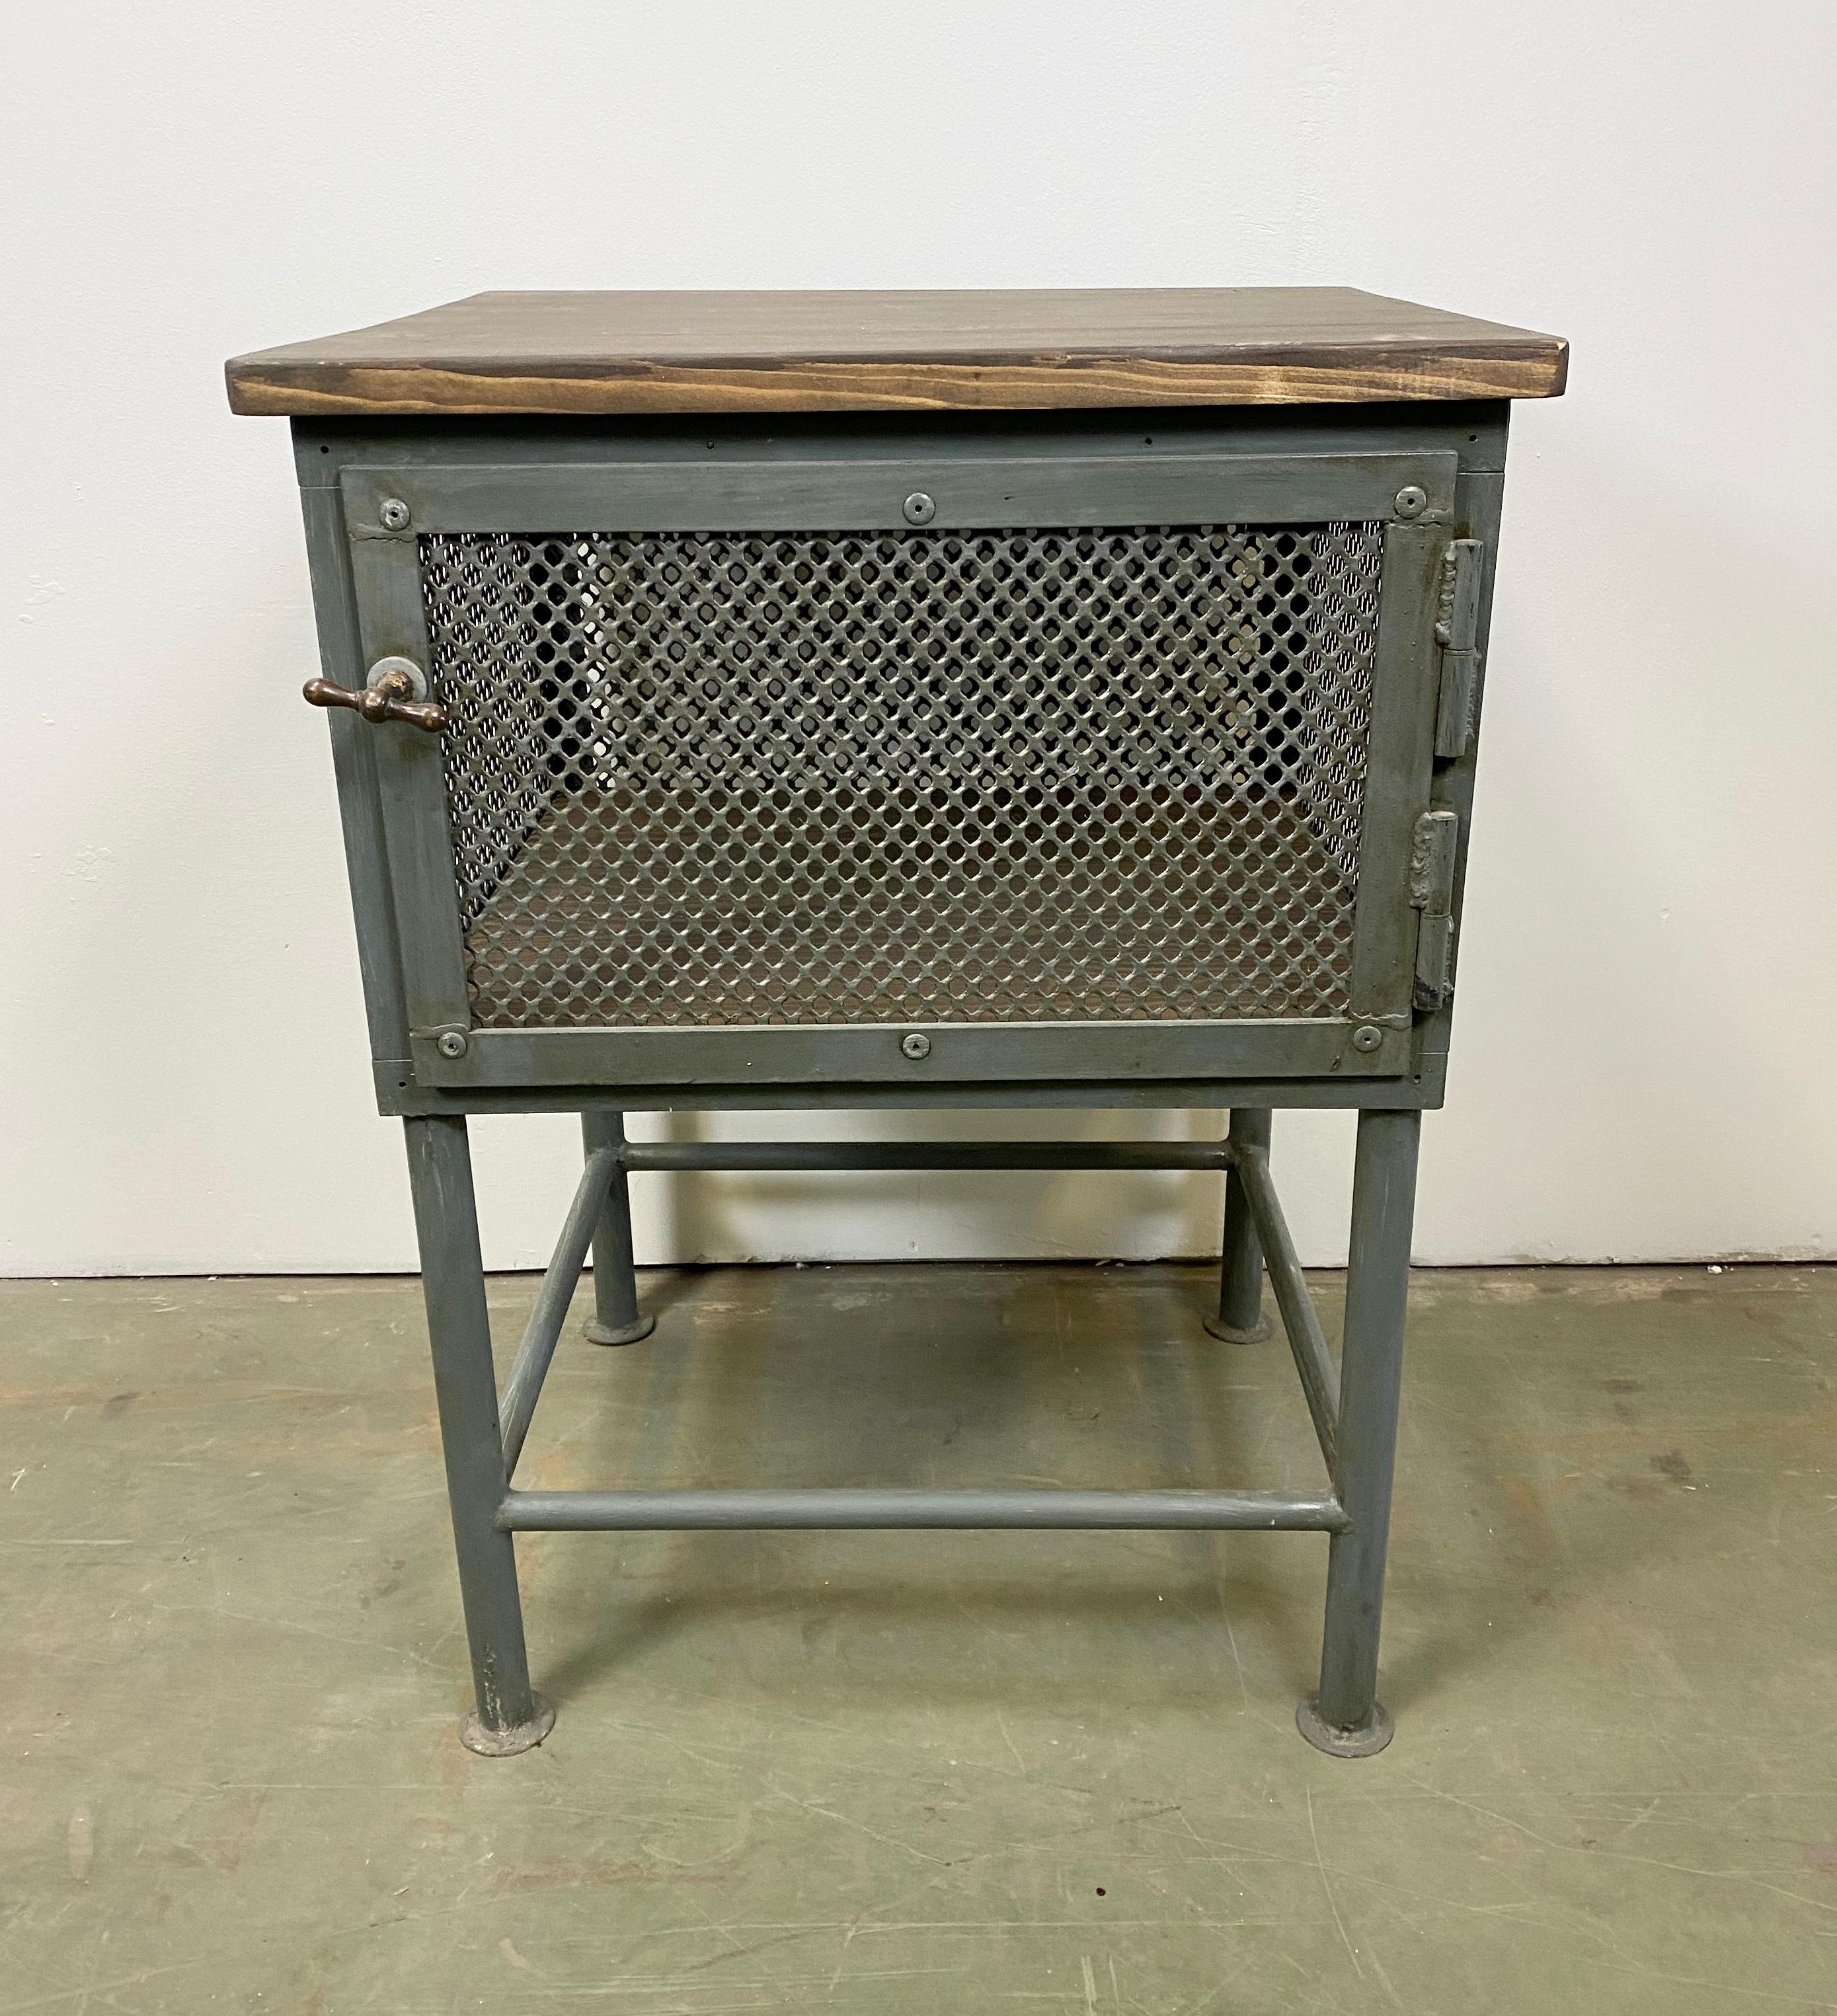 Industrial worktable with storage space from the 1960s. It features a grey iron construction and wooden plate. The weight of the table is 27 kg.